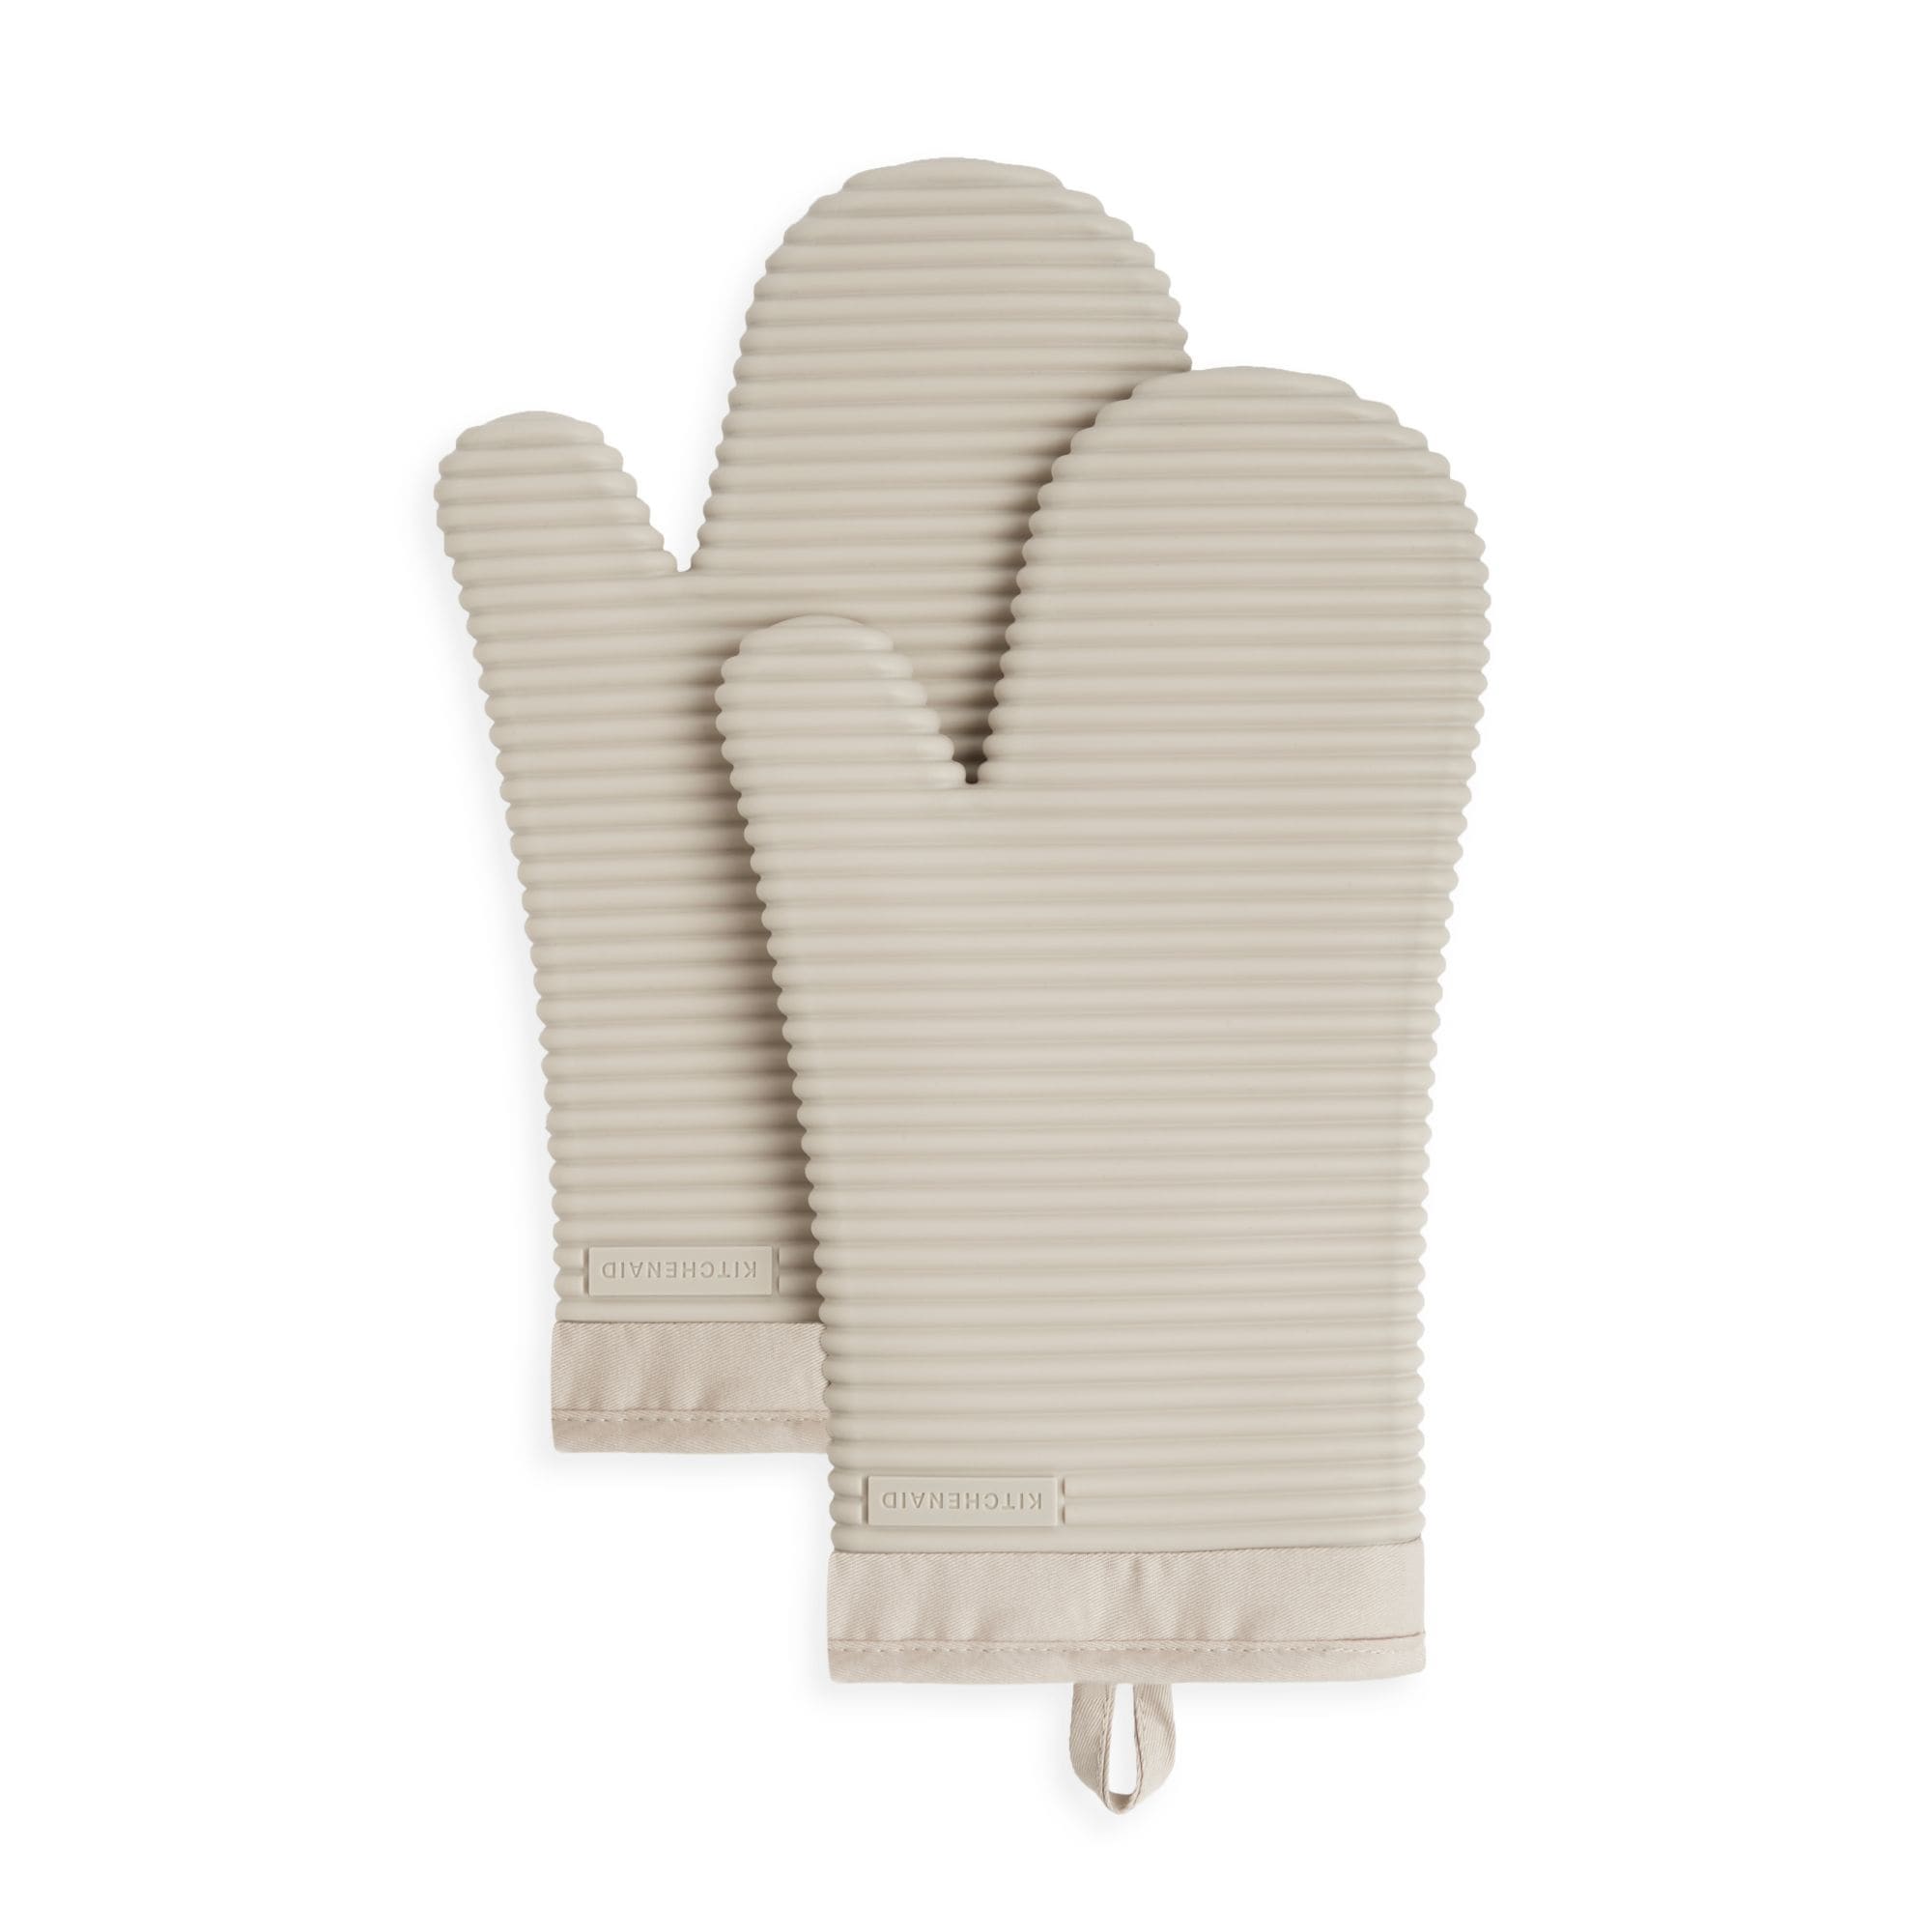 Bakery Heat Resistance Microwave Baking Oven Mitt Gloves Silver White -  14.6 x 5.9(L*W) - Bed Bath & Beyond - 17587884